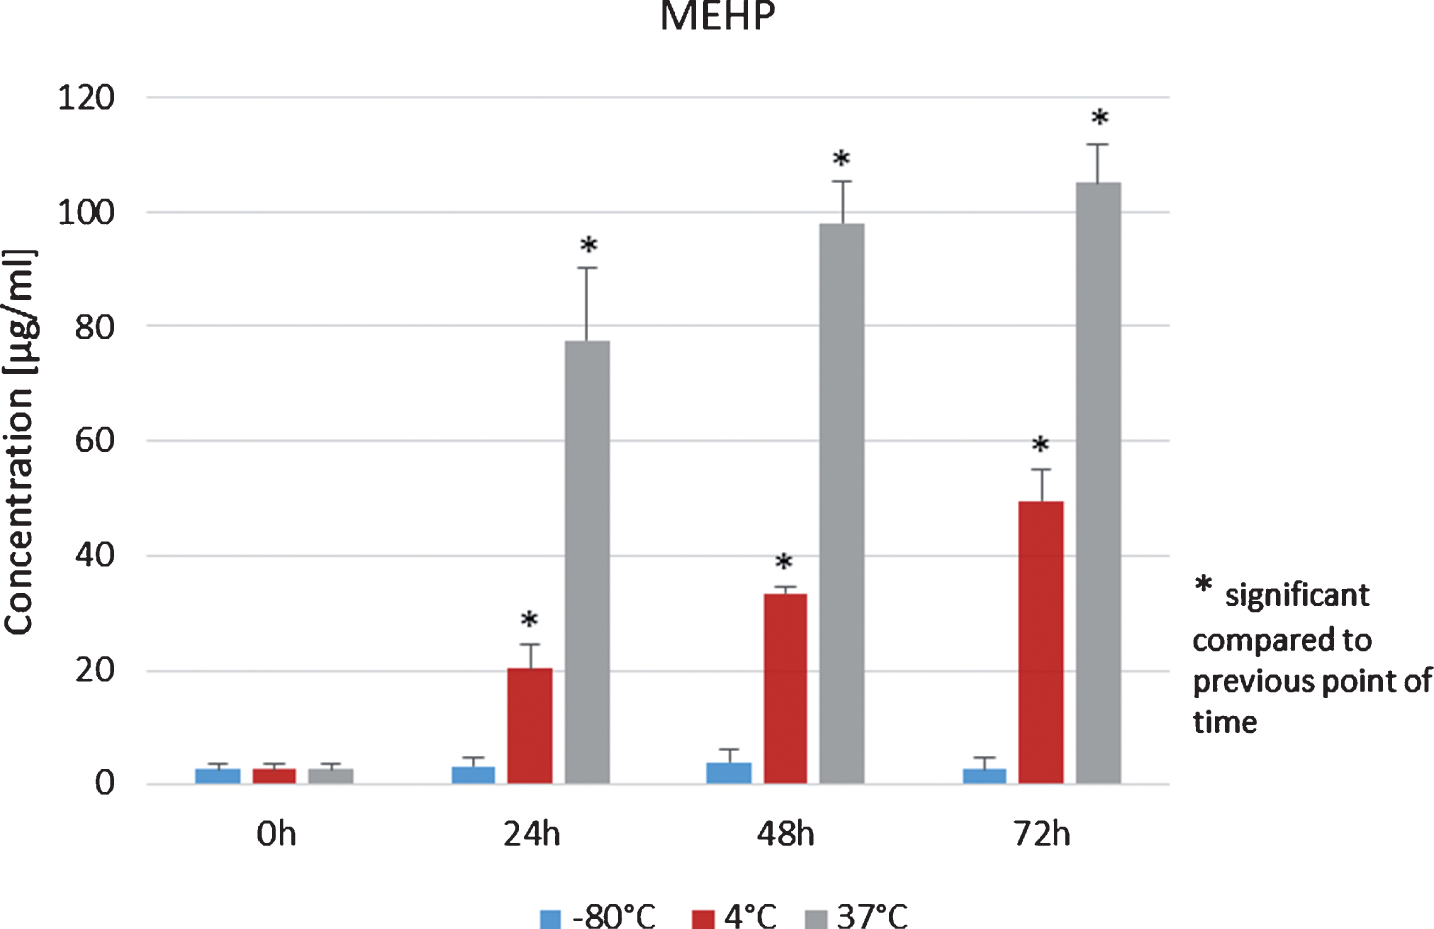 MEHP concentrations in the plasma of peripheral stem cell donors during storage at –80°C, 4°C and 37°C.